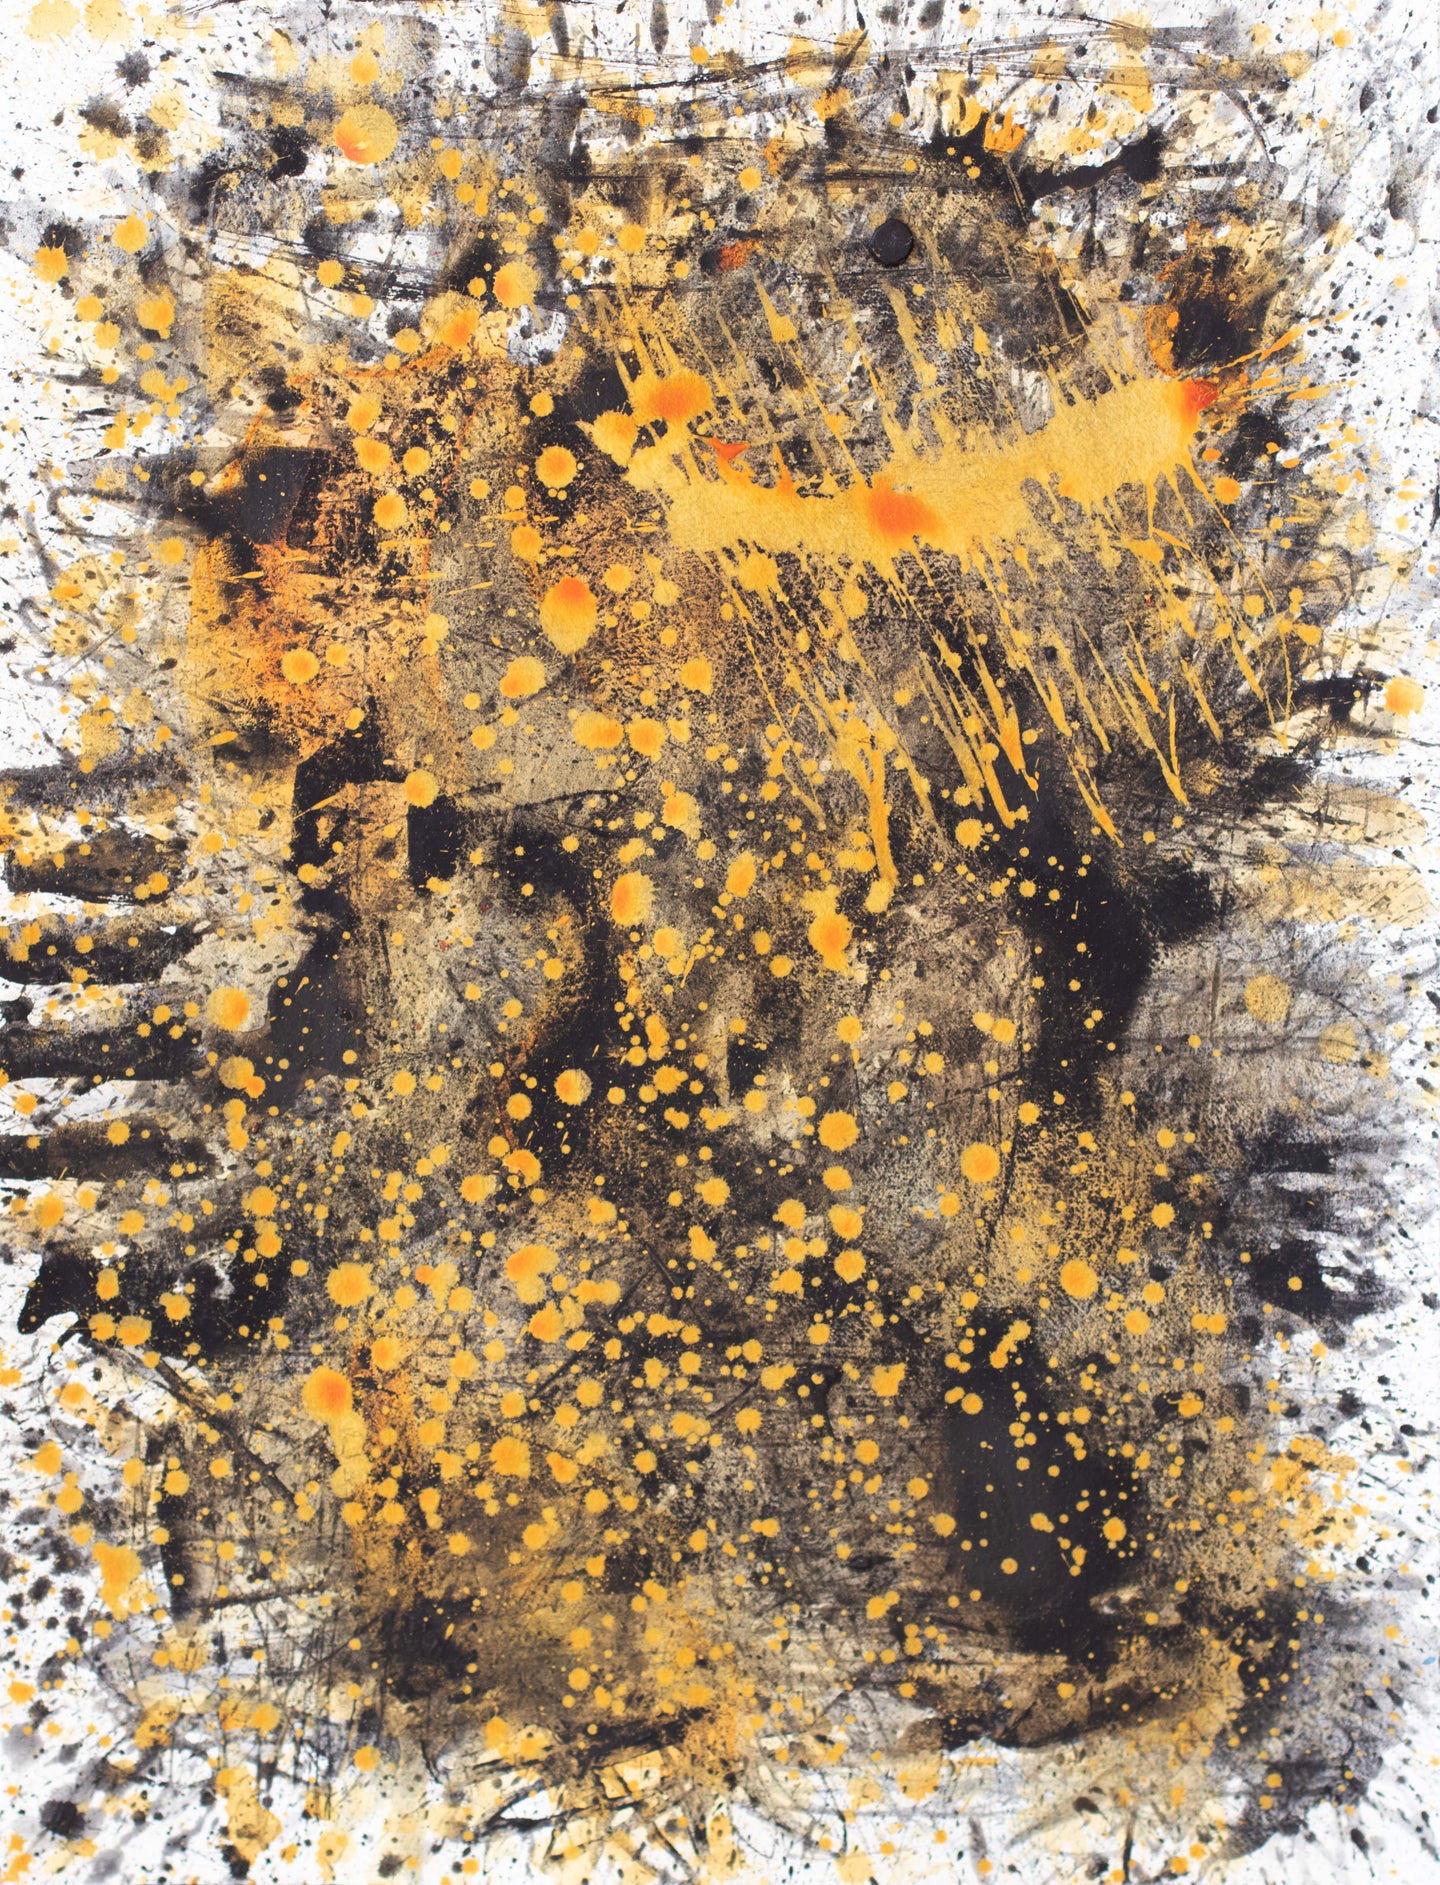 J. Steven Manolis, Metallica (Gold, Black & White) 3, 2021, Watercolor and Acrylic on paper, 30 x 22 inches, metallic watercolor wall art